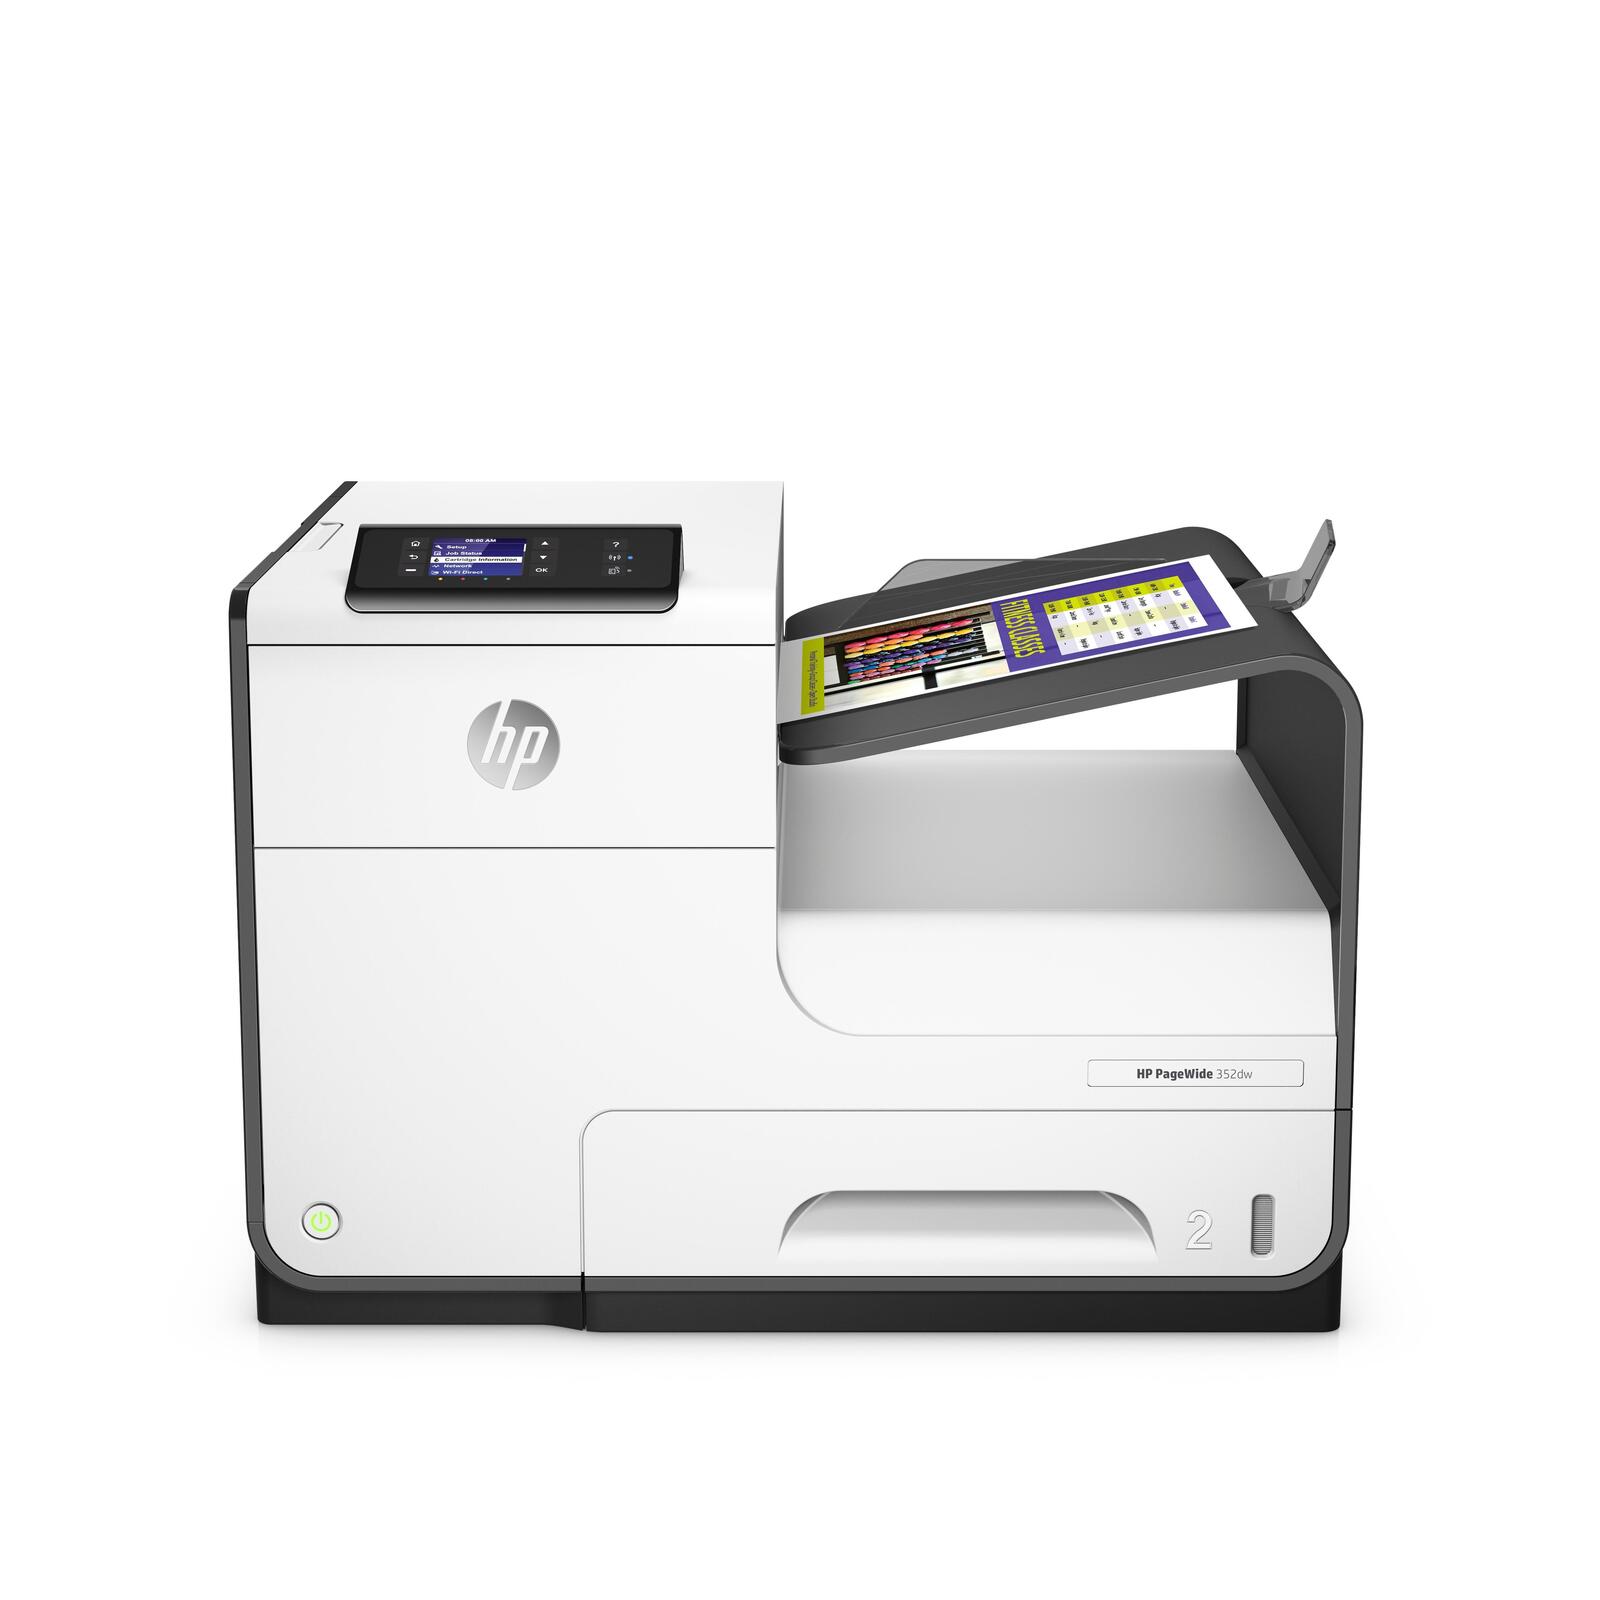 HP PageWide 352 dw